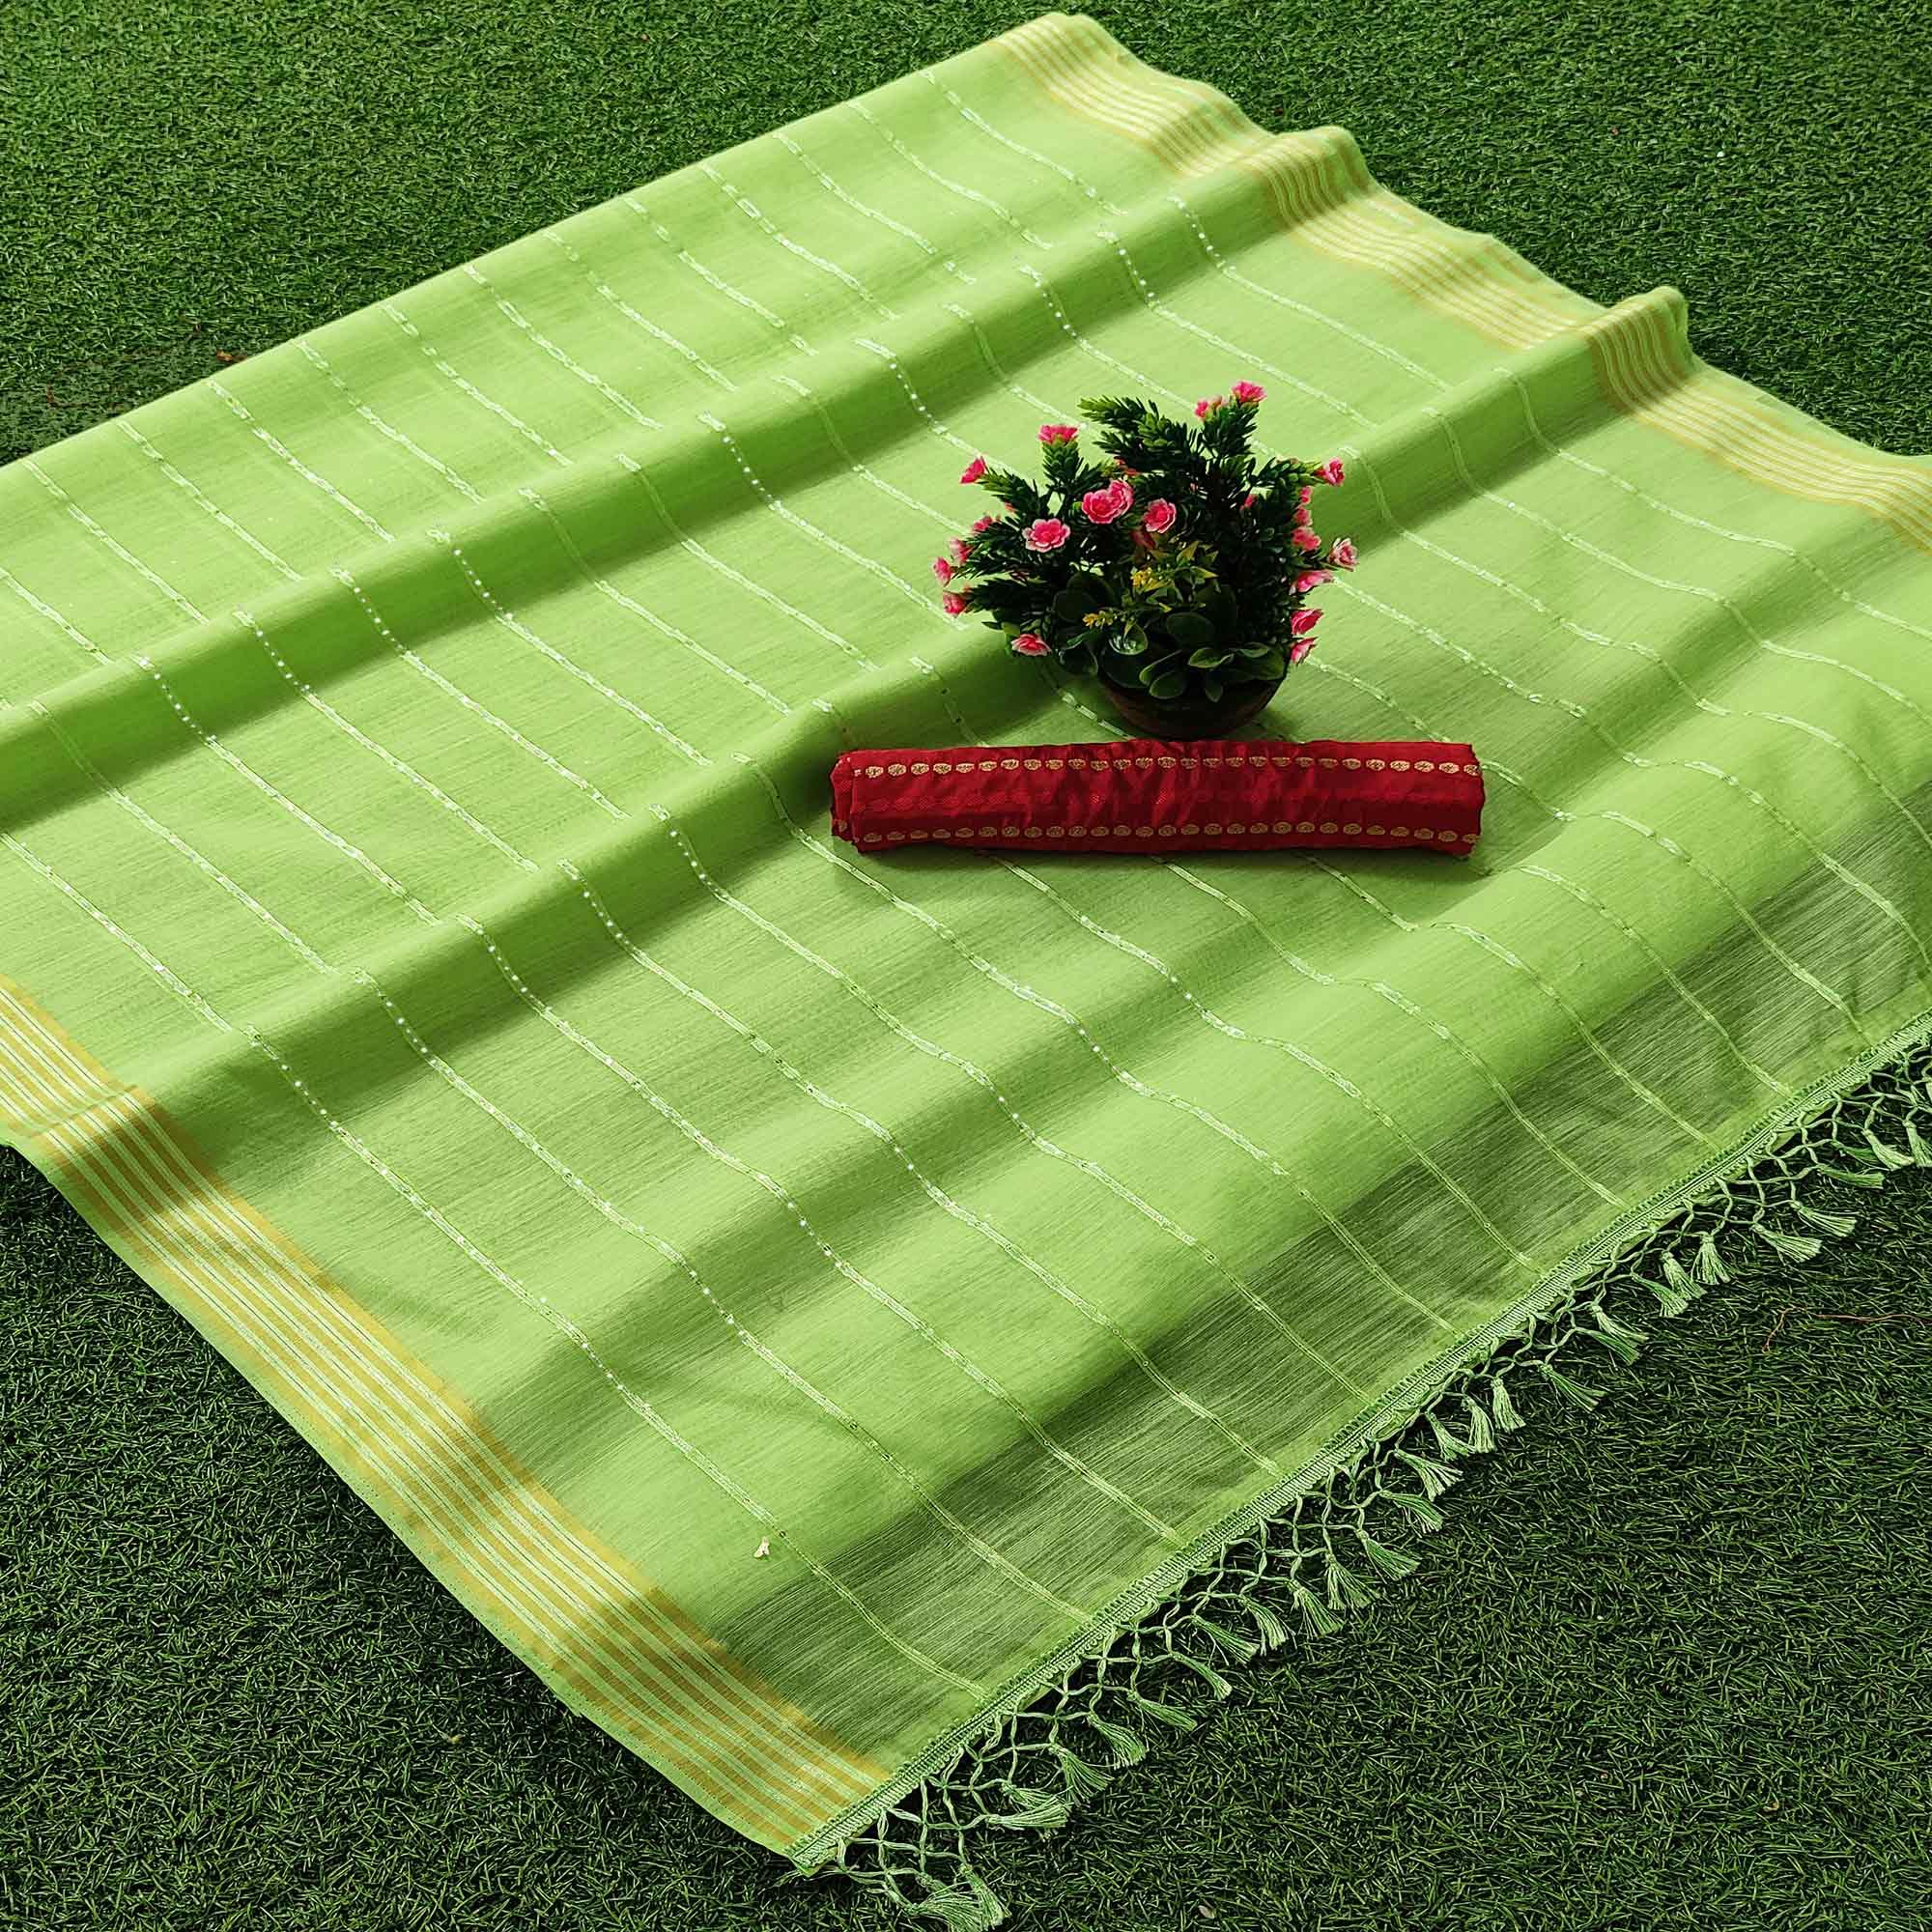 Parrot Green Festive Wear Stripes With Sequence Woven Work Cotton Saree - Peachmode